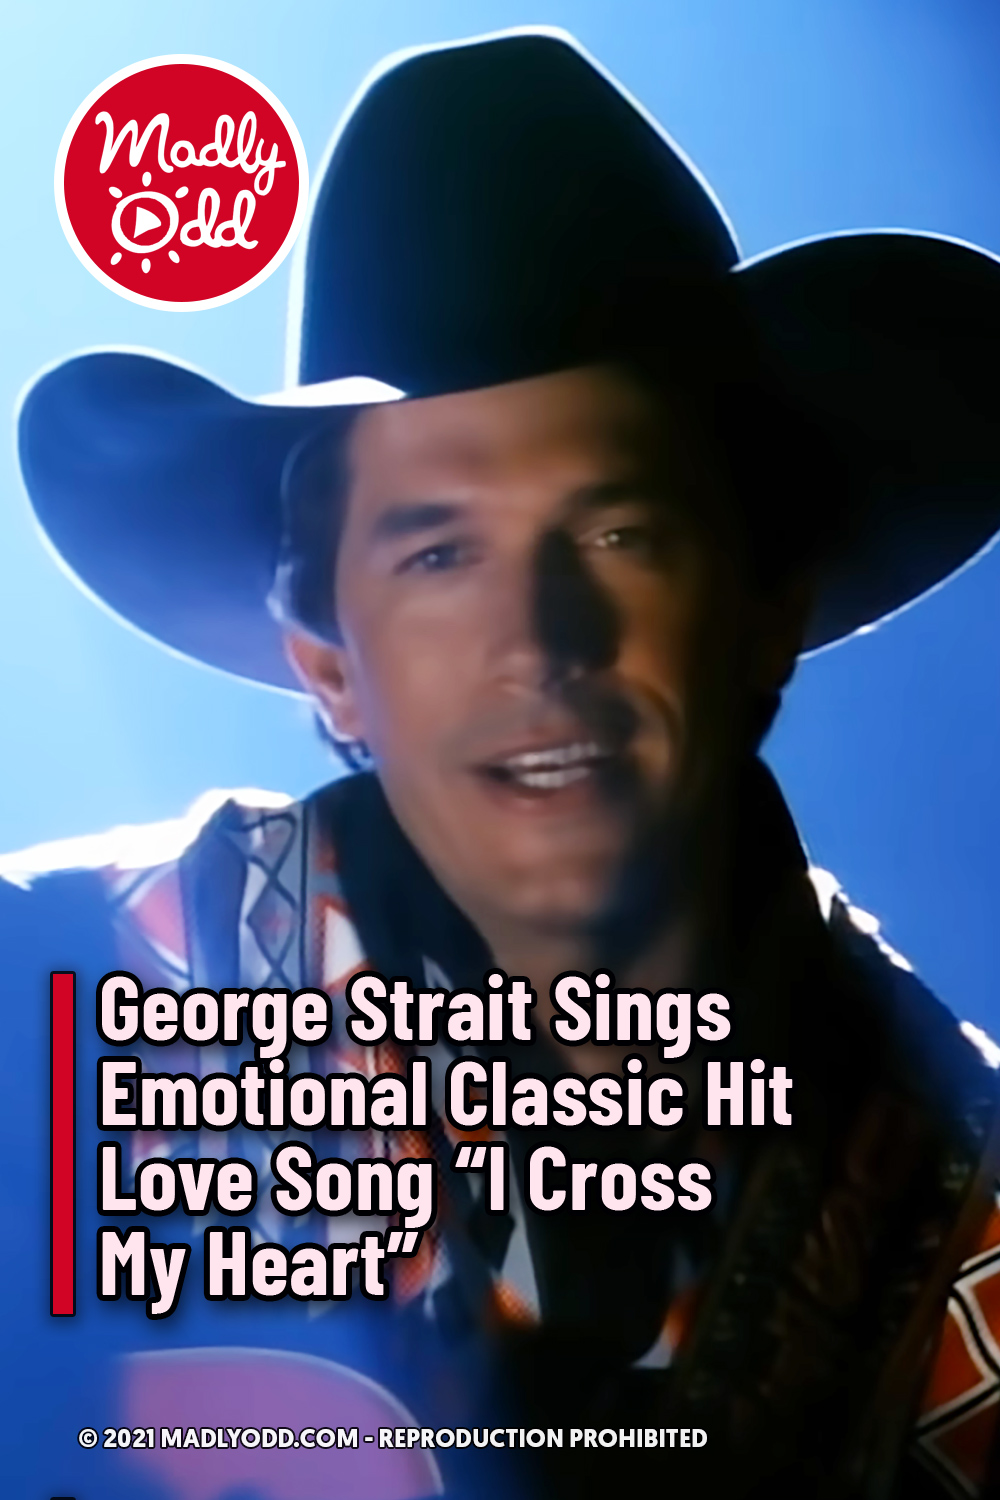 George Strait Sings Emotional Classic Hit Love Song “I Cross My Heart”